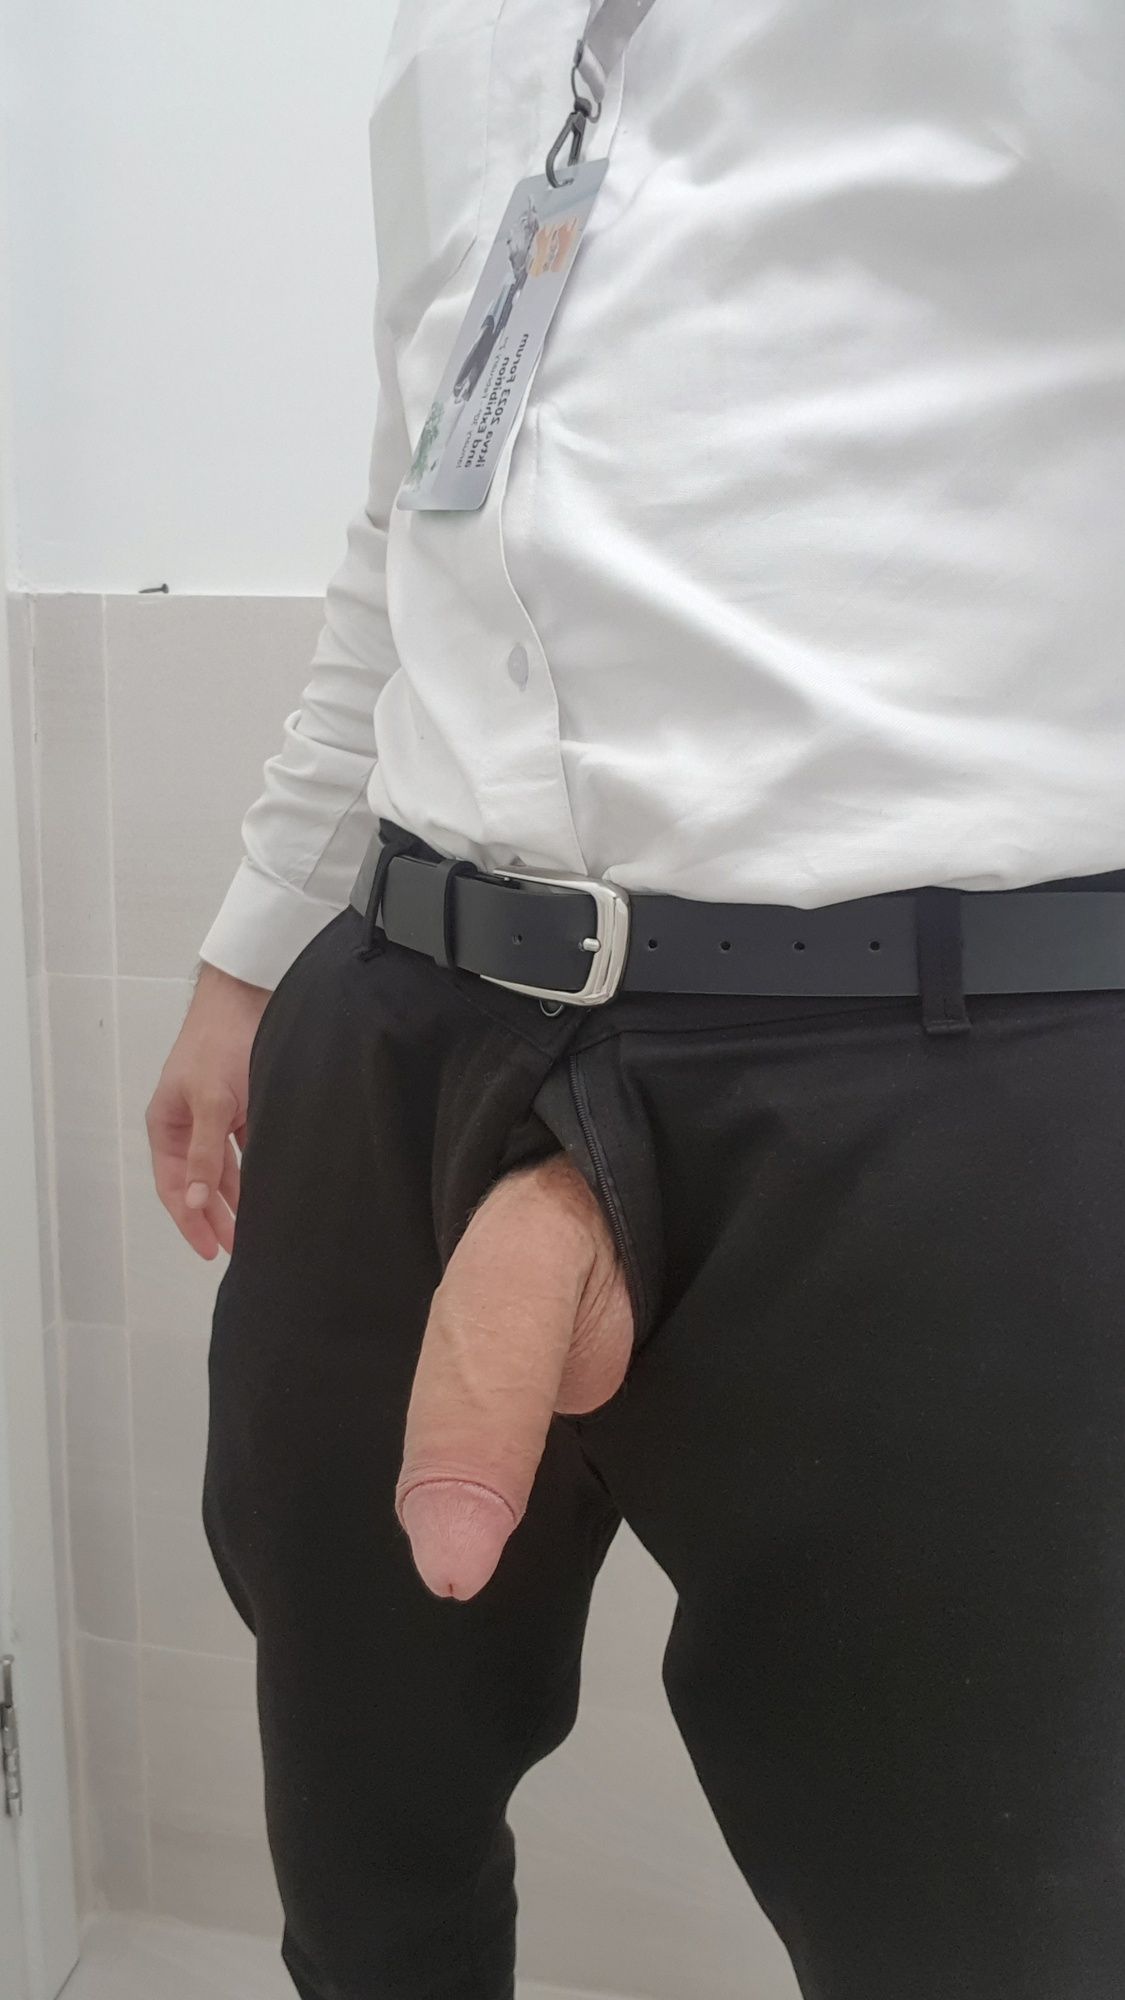 Had to let my cock out to breathe in the office toilet